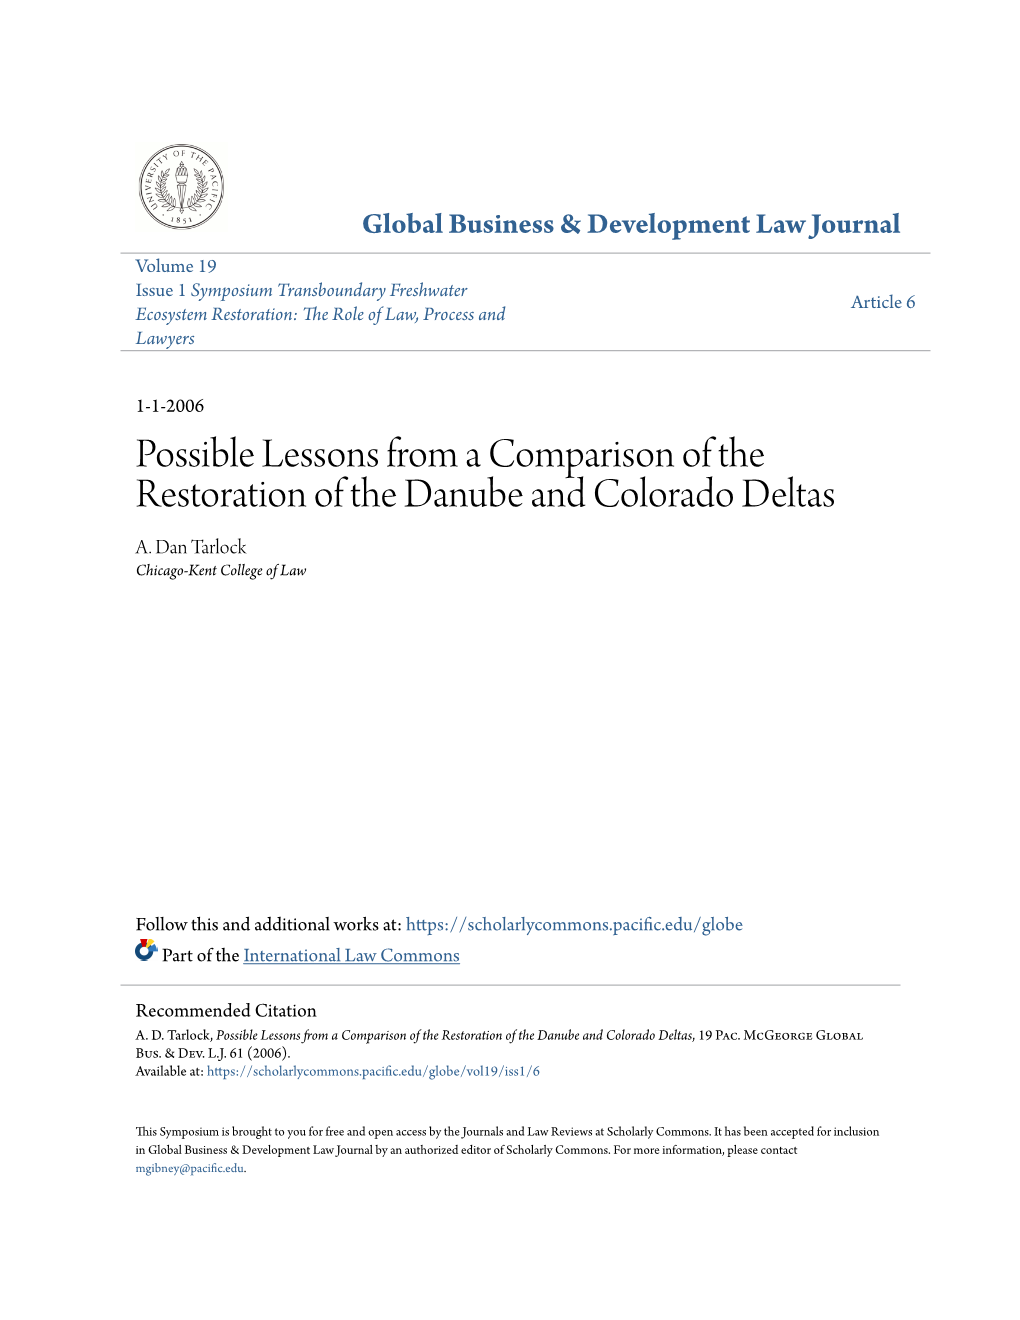 Possible Lessons from a Comparison of the Restoration of the Danube and Colorado Deltas A